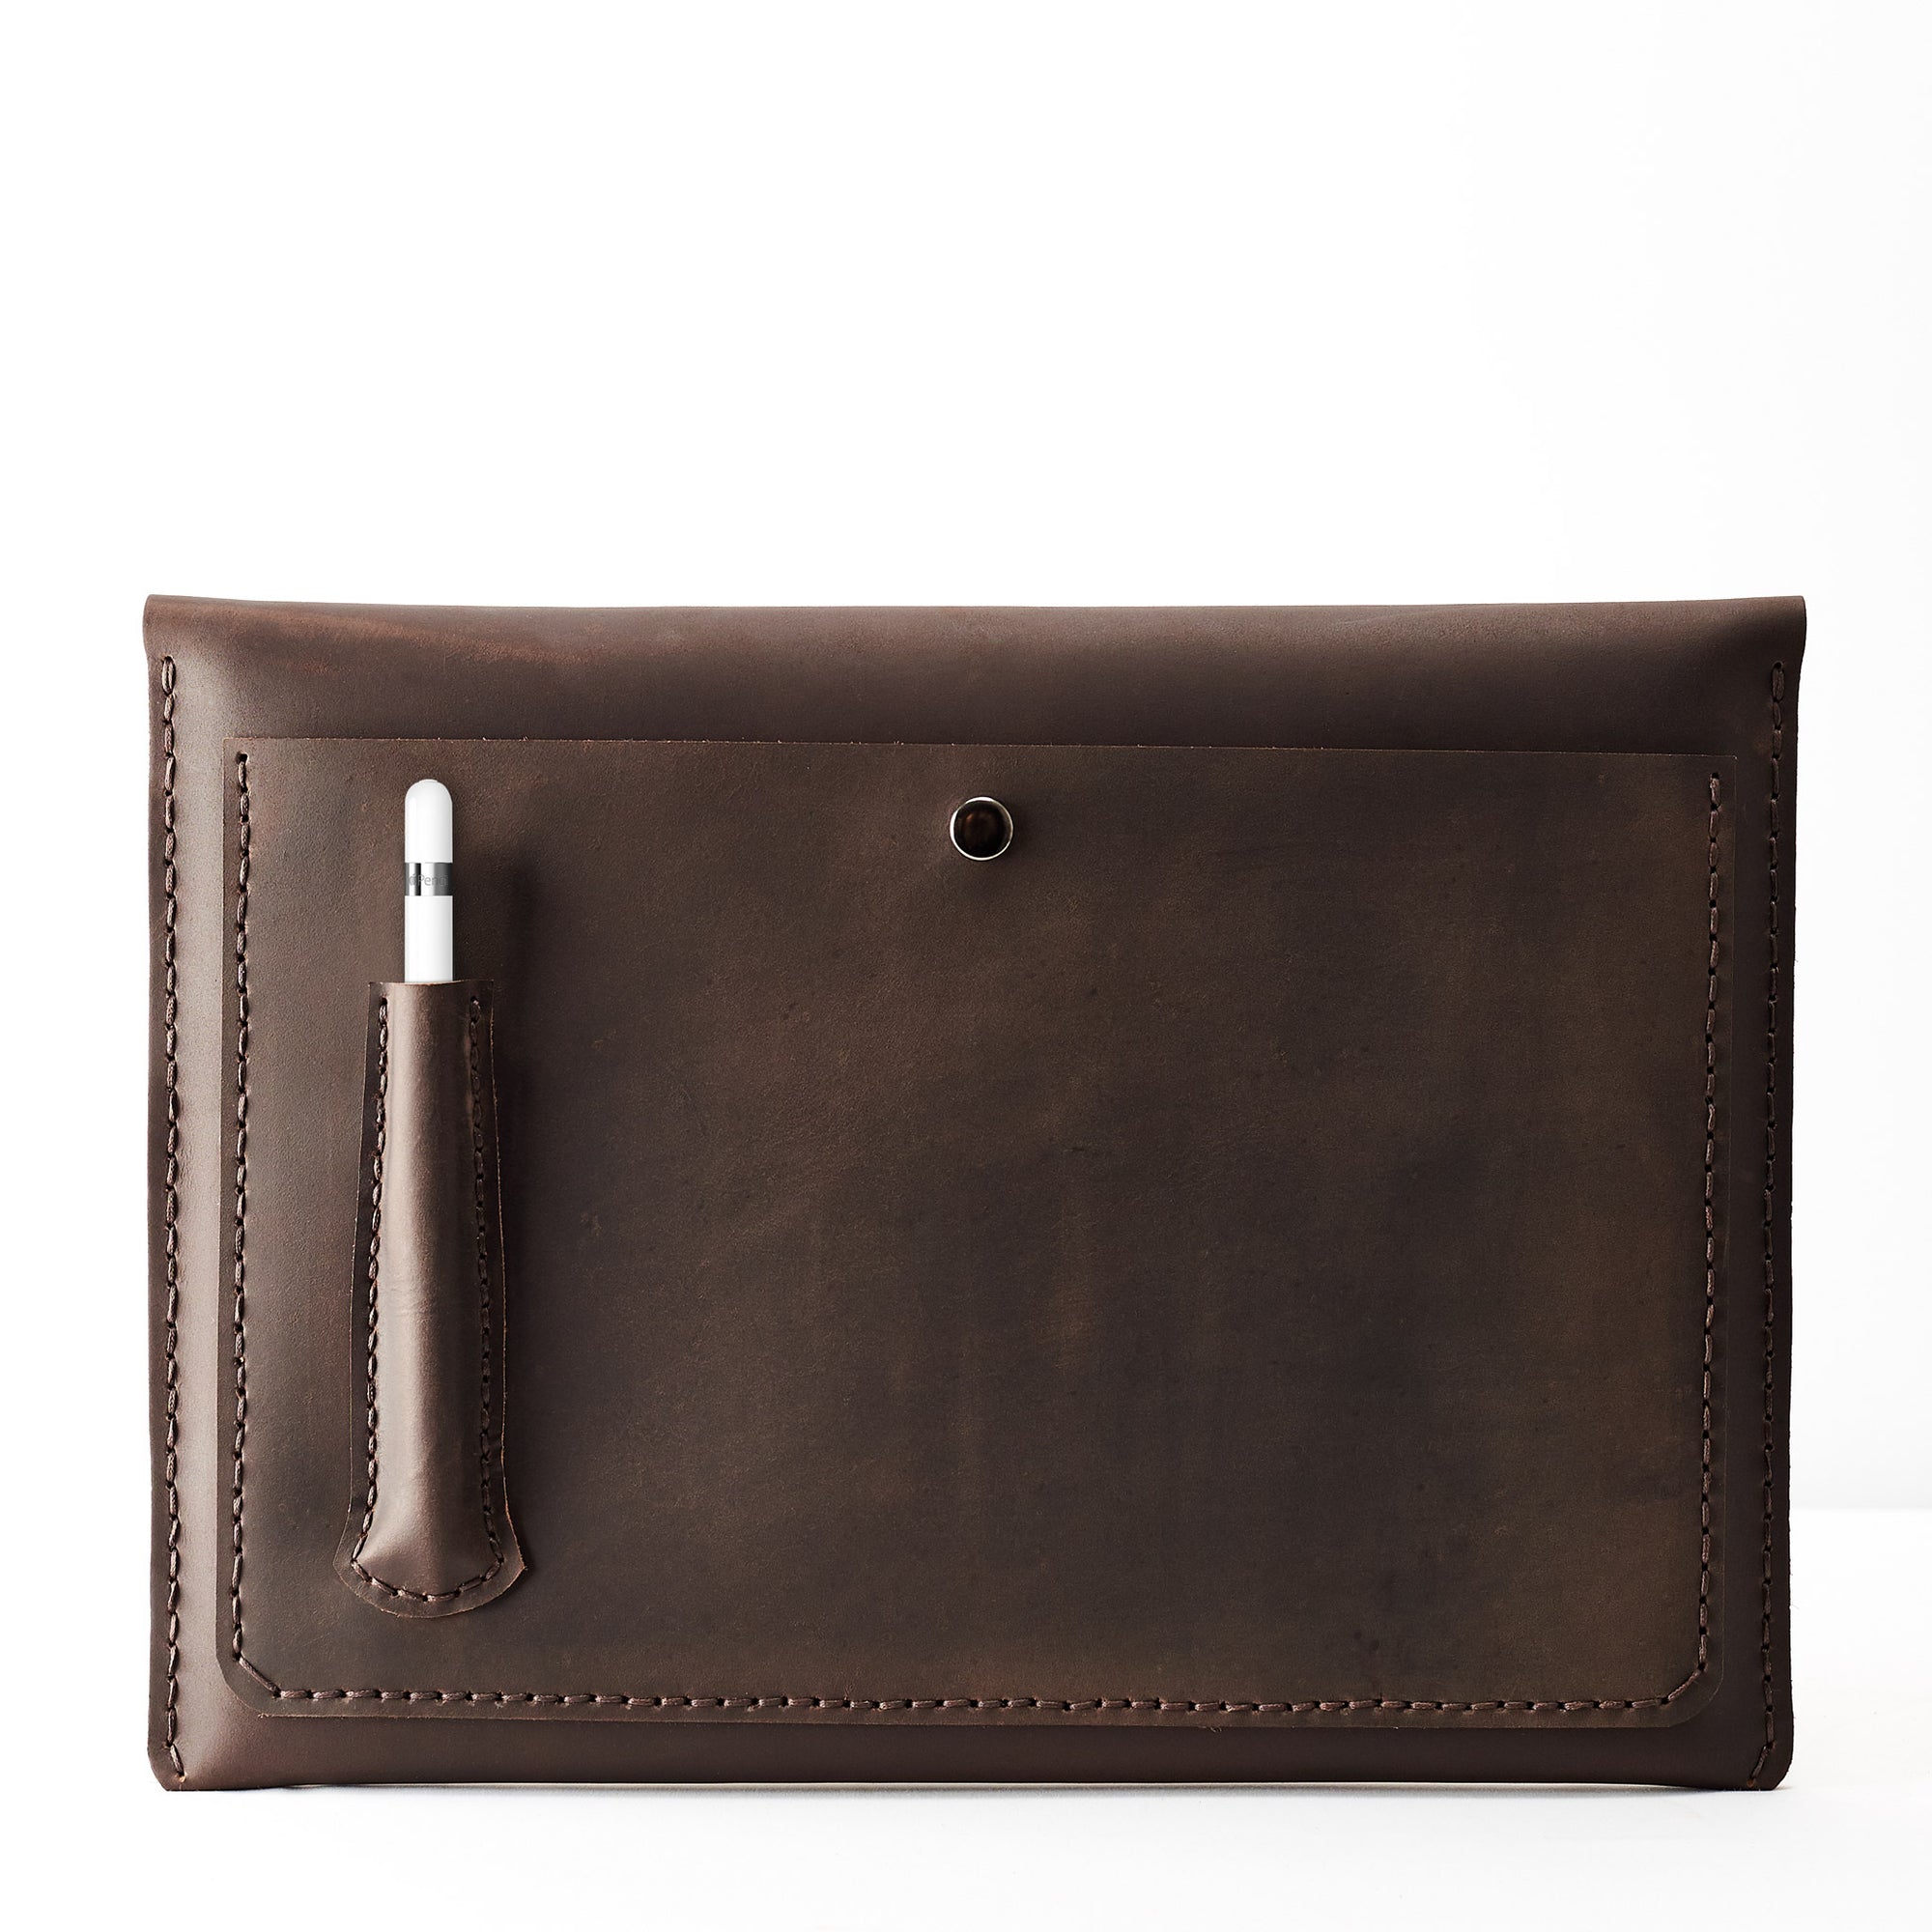 Back pocket and Apple Pencil holder. Dark brown iPad pro 12.9 inch leather sleeve. Mens leather iPad case for mens gifts